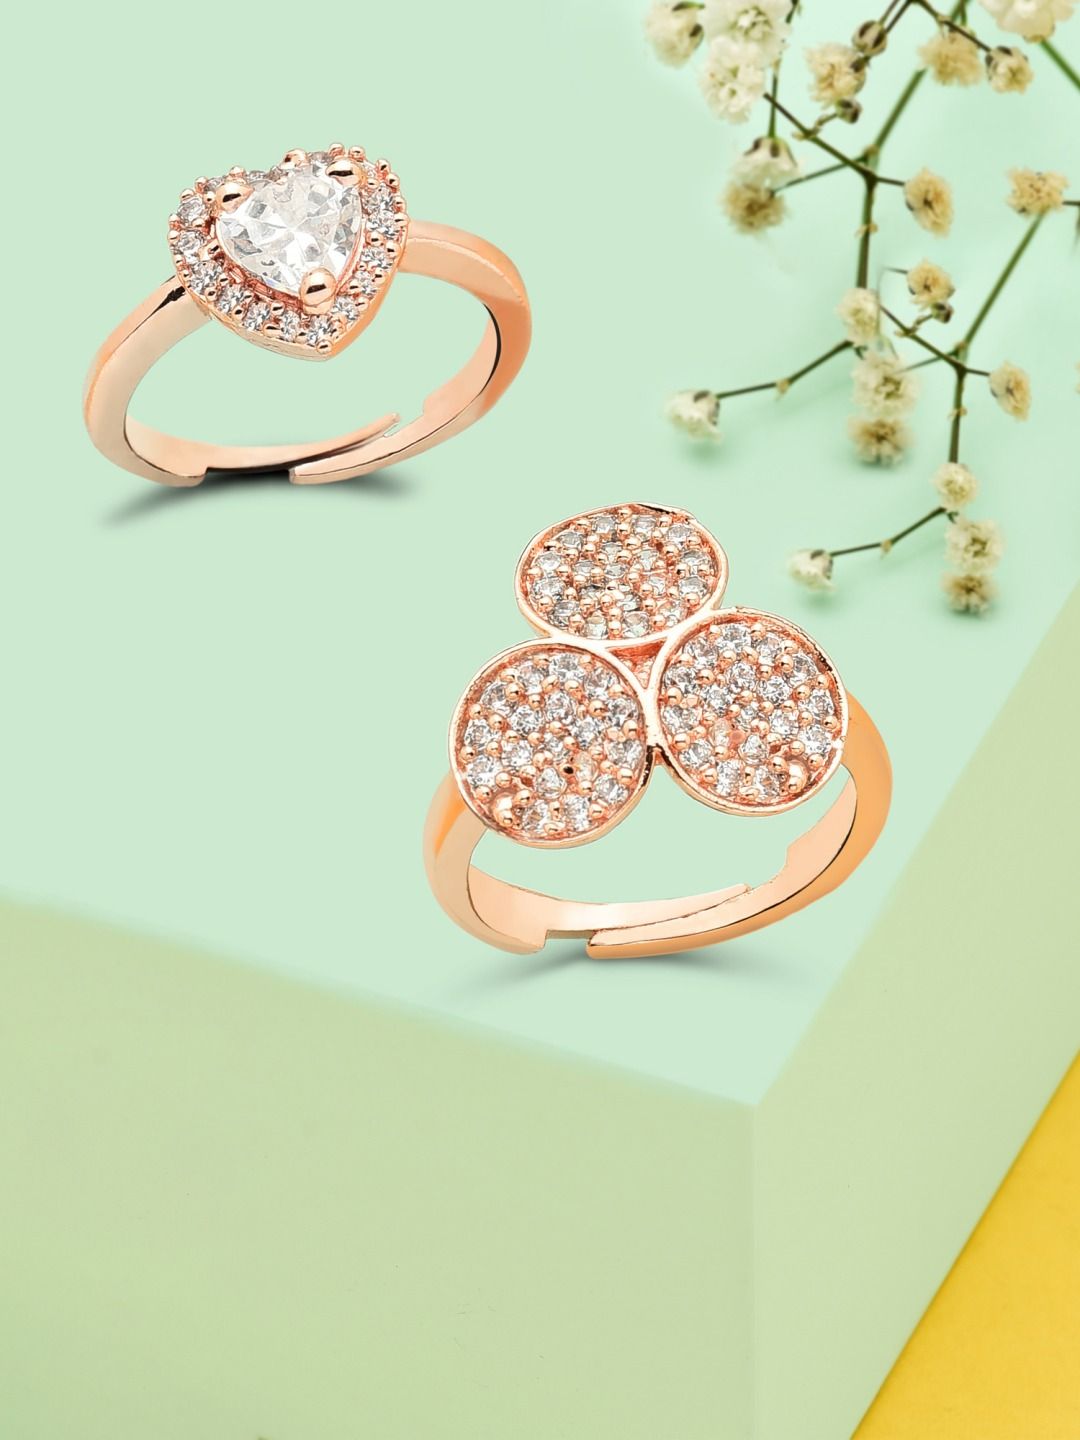 Zaveri Pearls Set Of 2 Rose Gold-Plated & White CZ-Studded Finger Rings Price in India